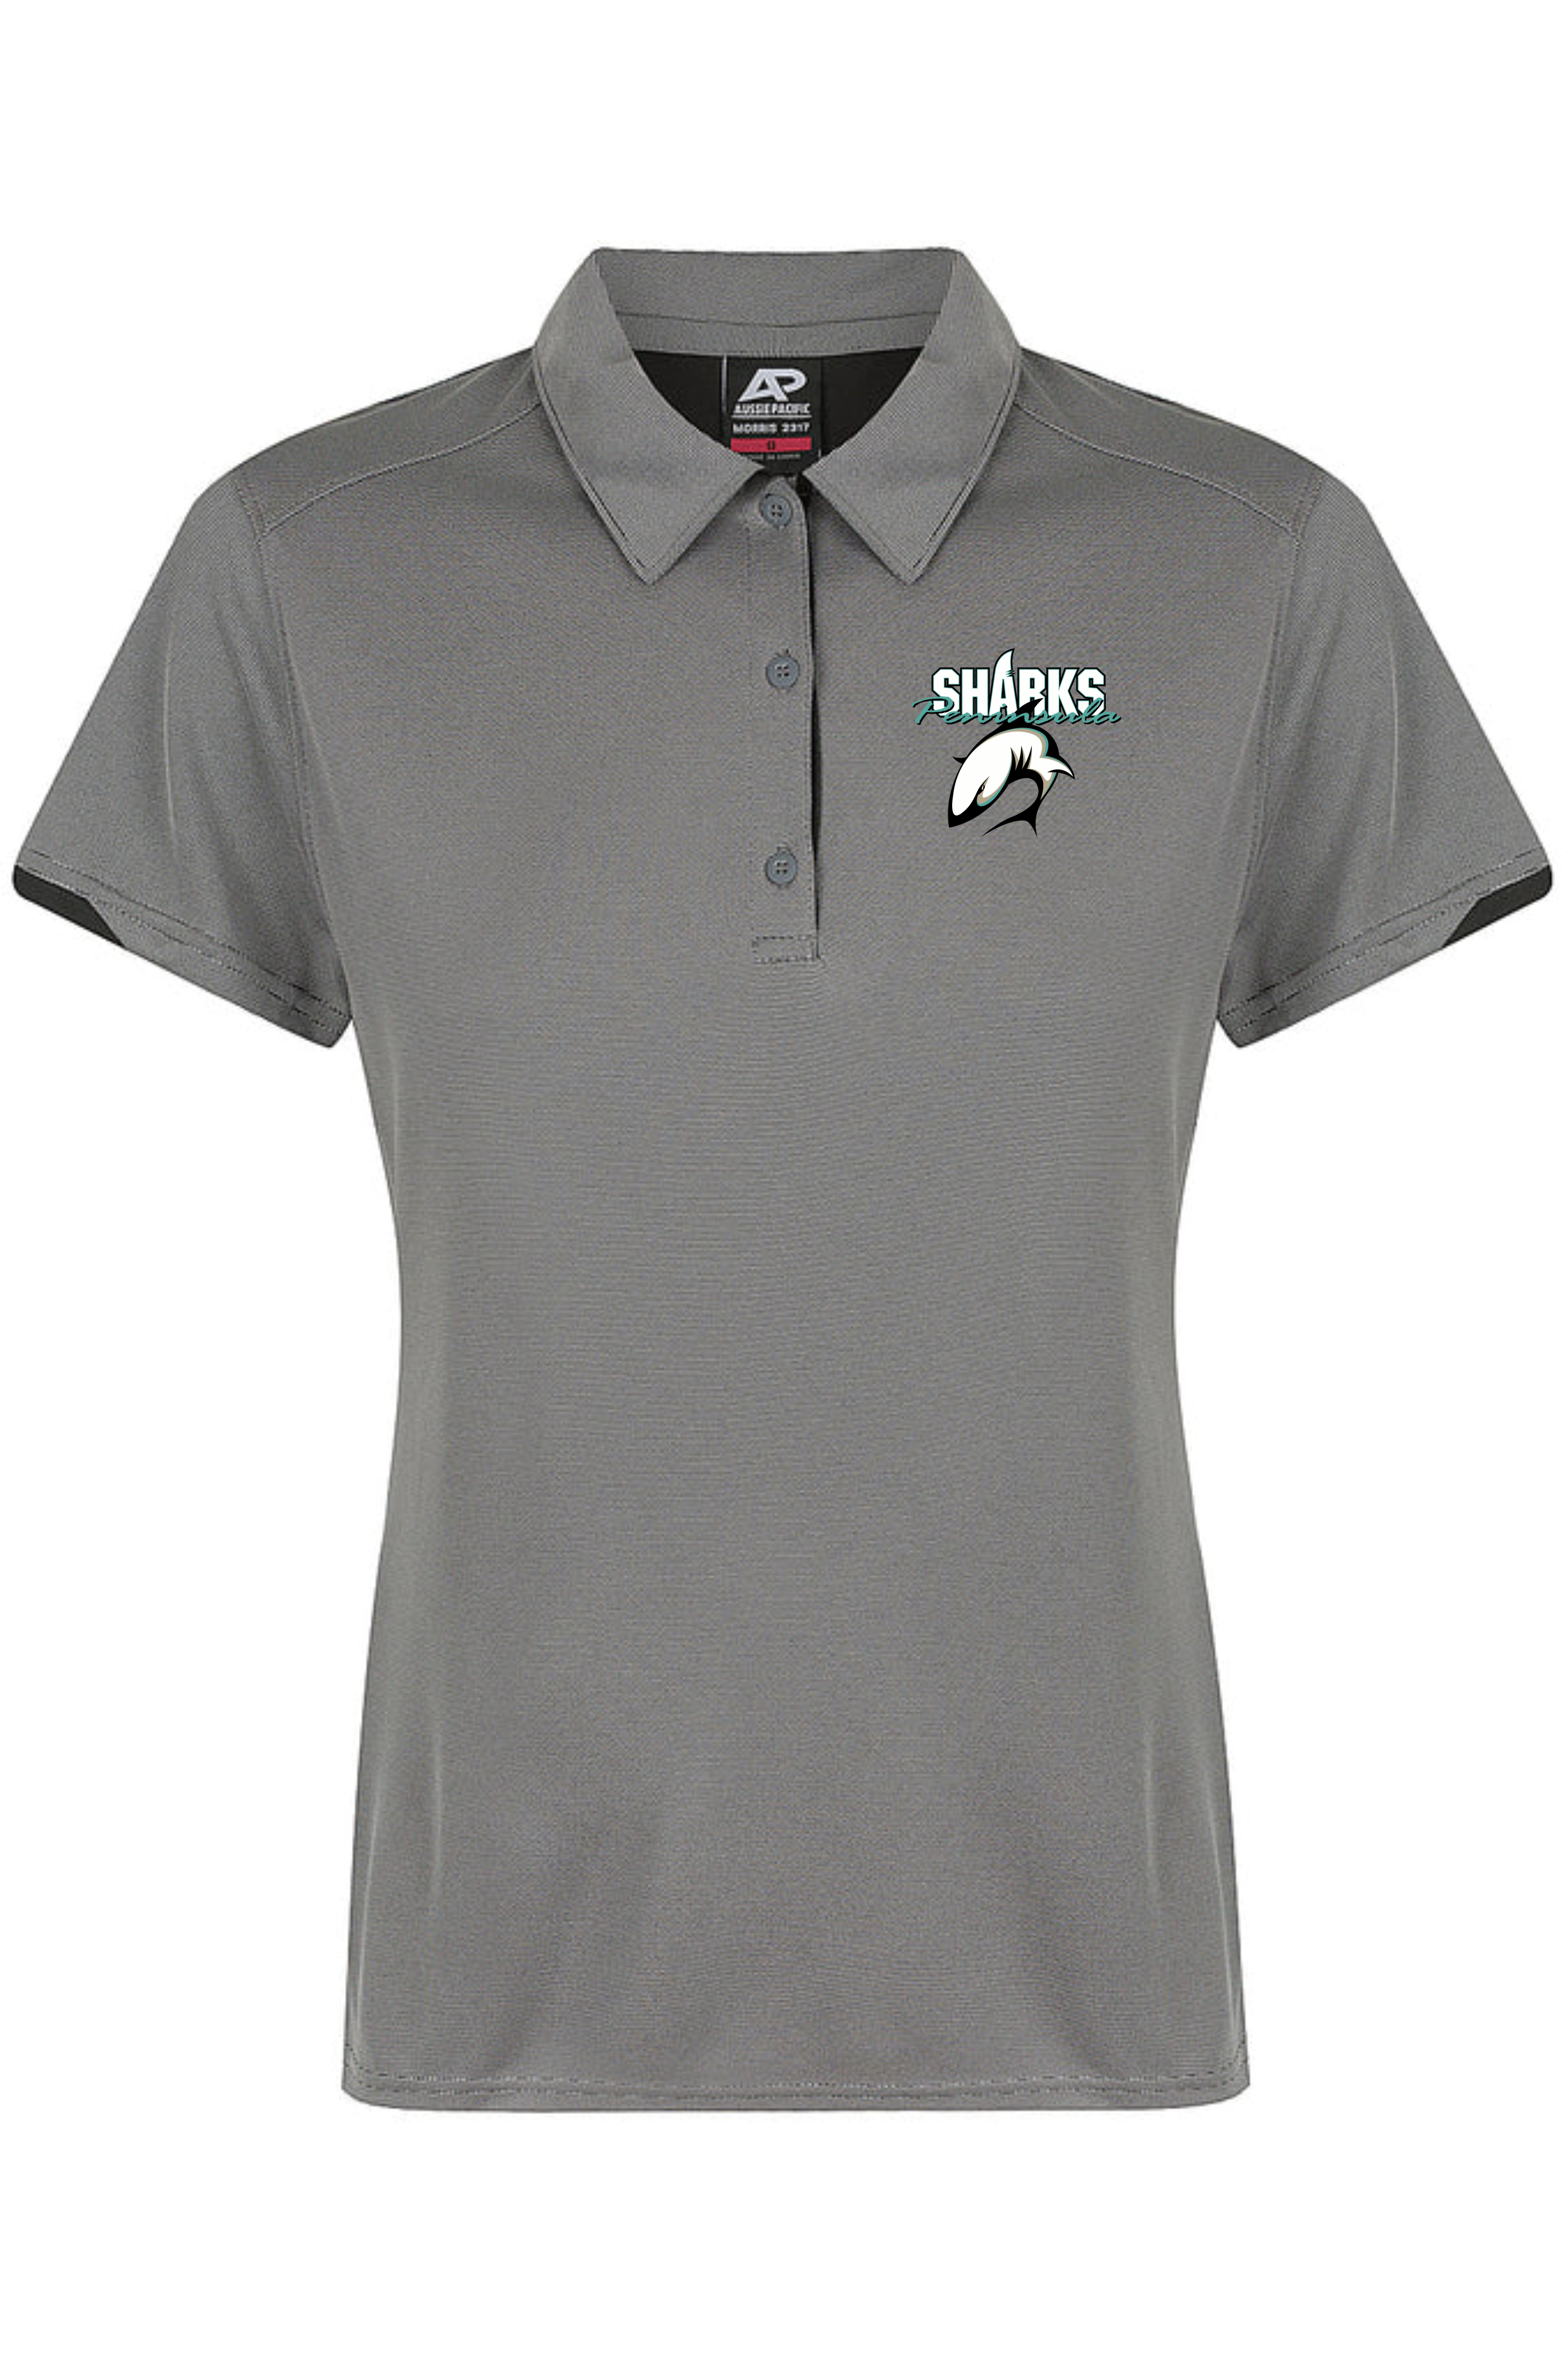 Sharks Ladies Club Polo – Black Marle with White